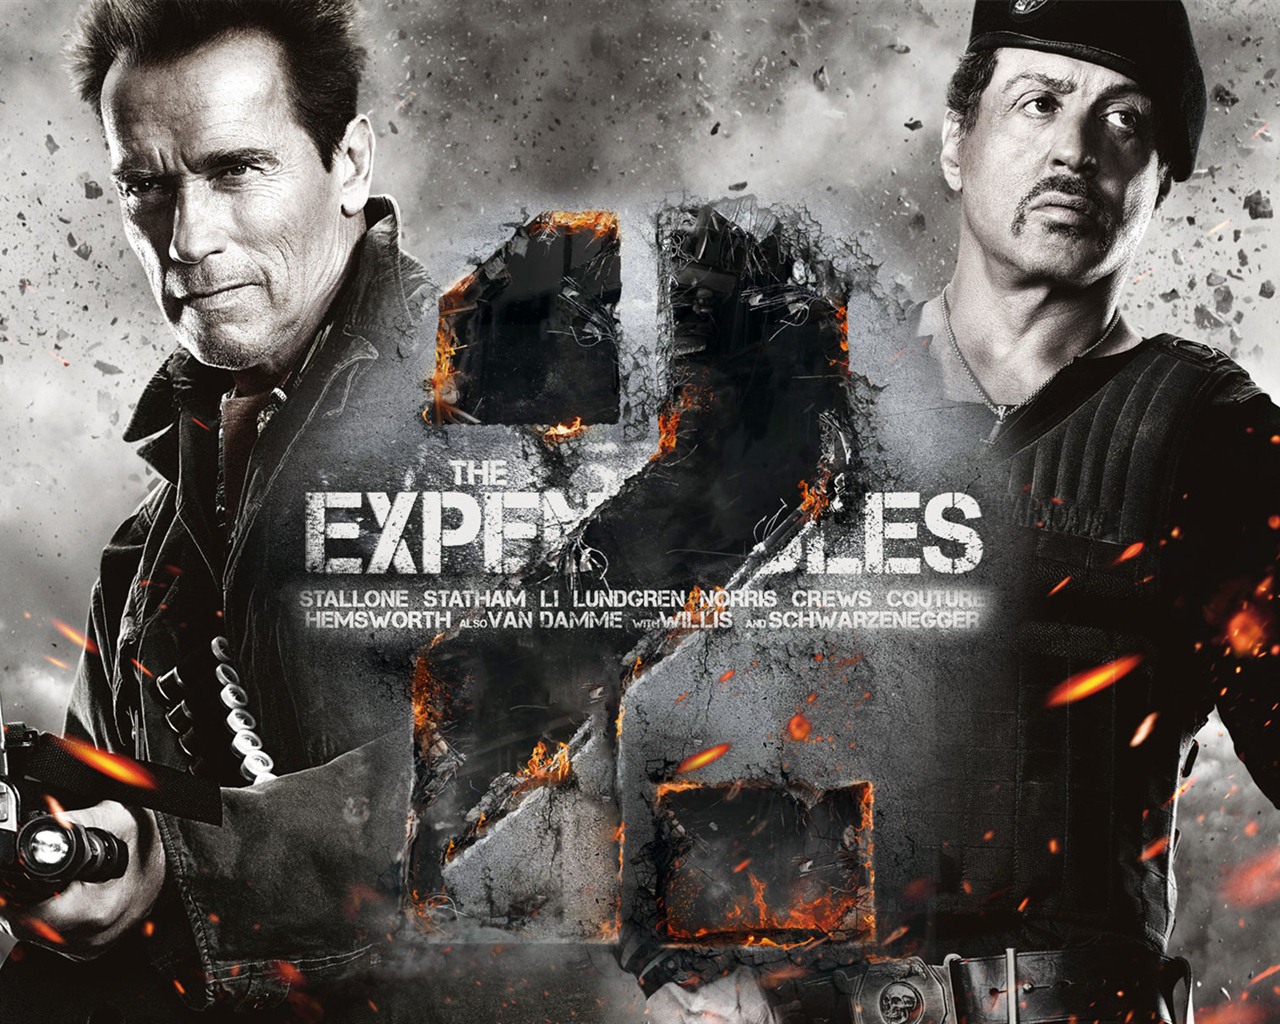 2012 Expendables2 HDの壁紙 #1 - 1280x1024